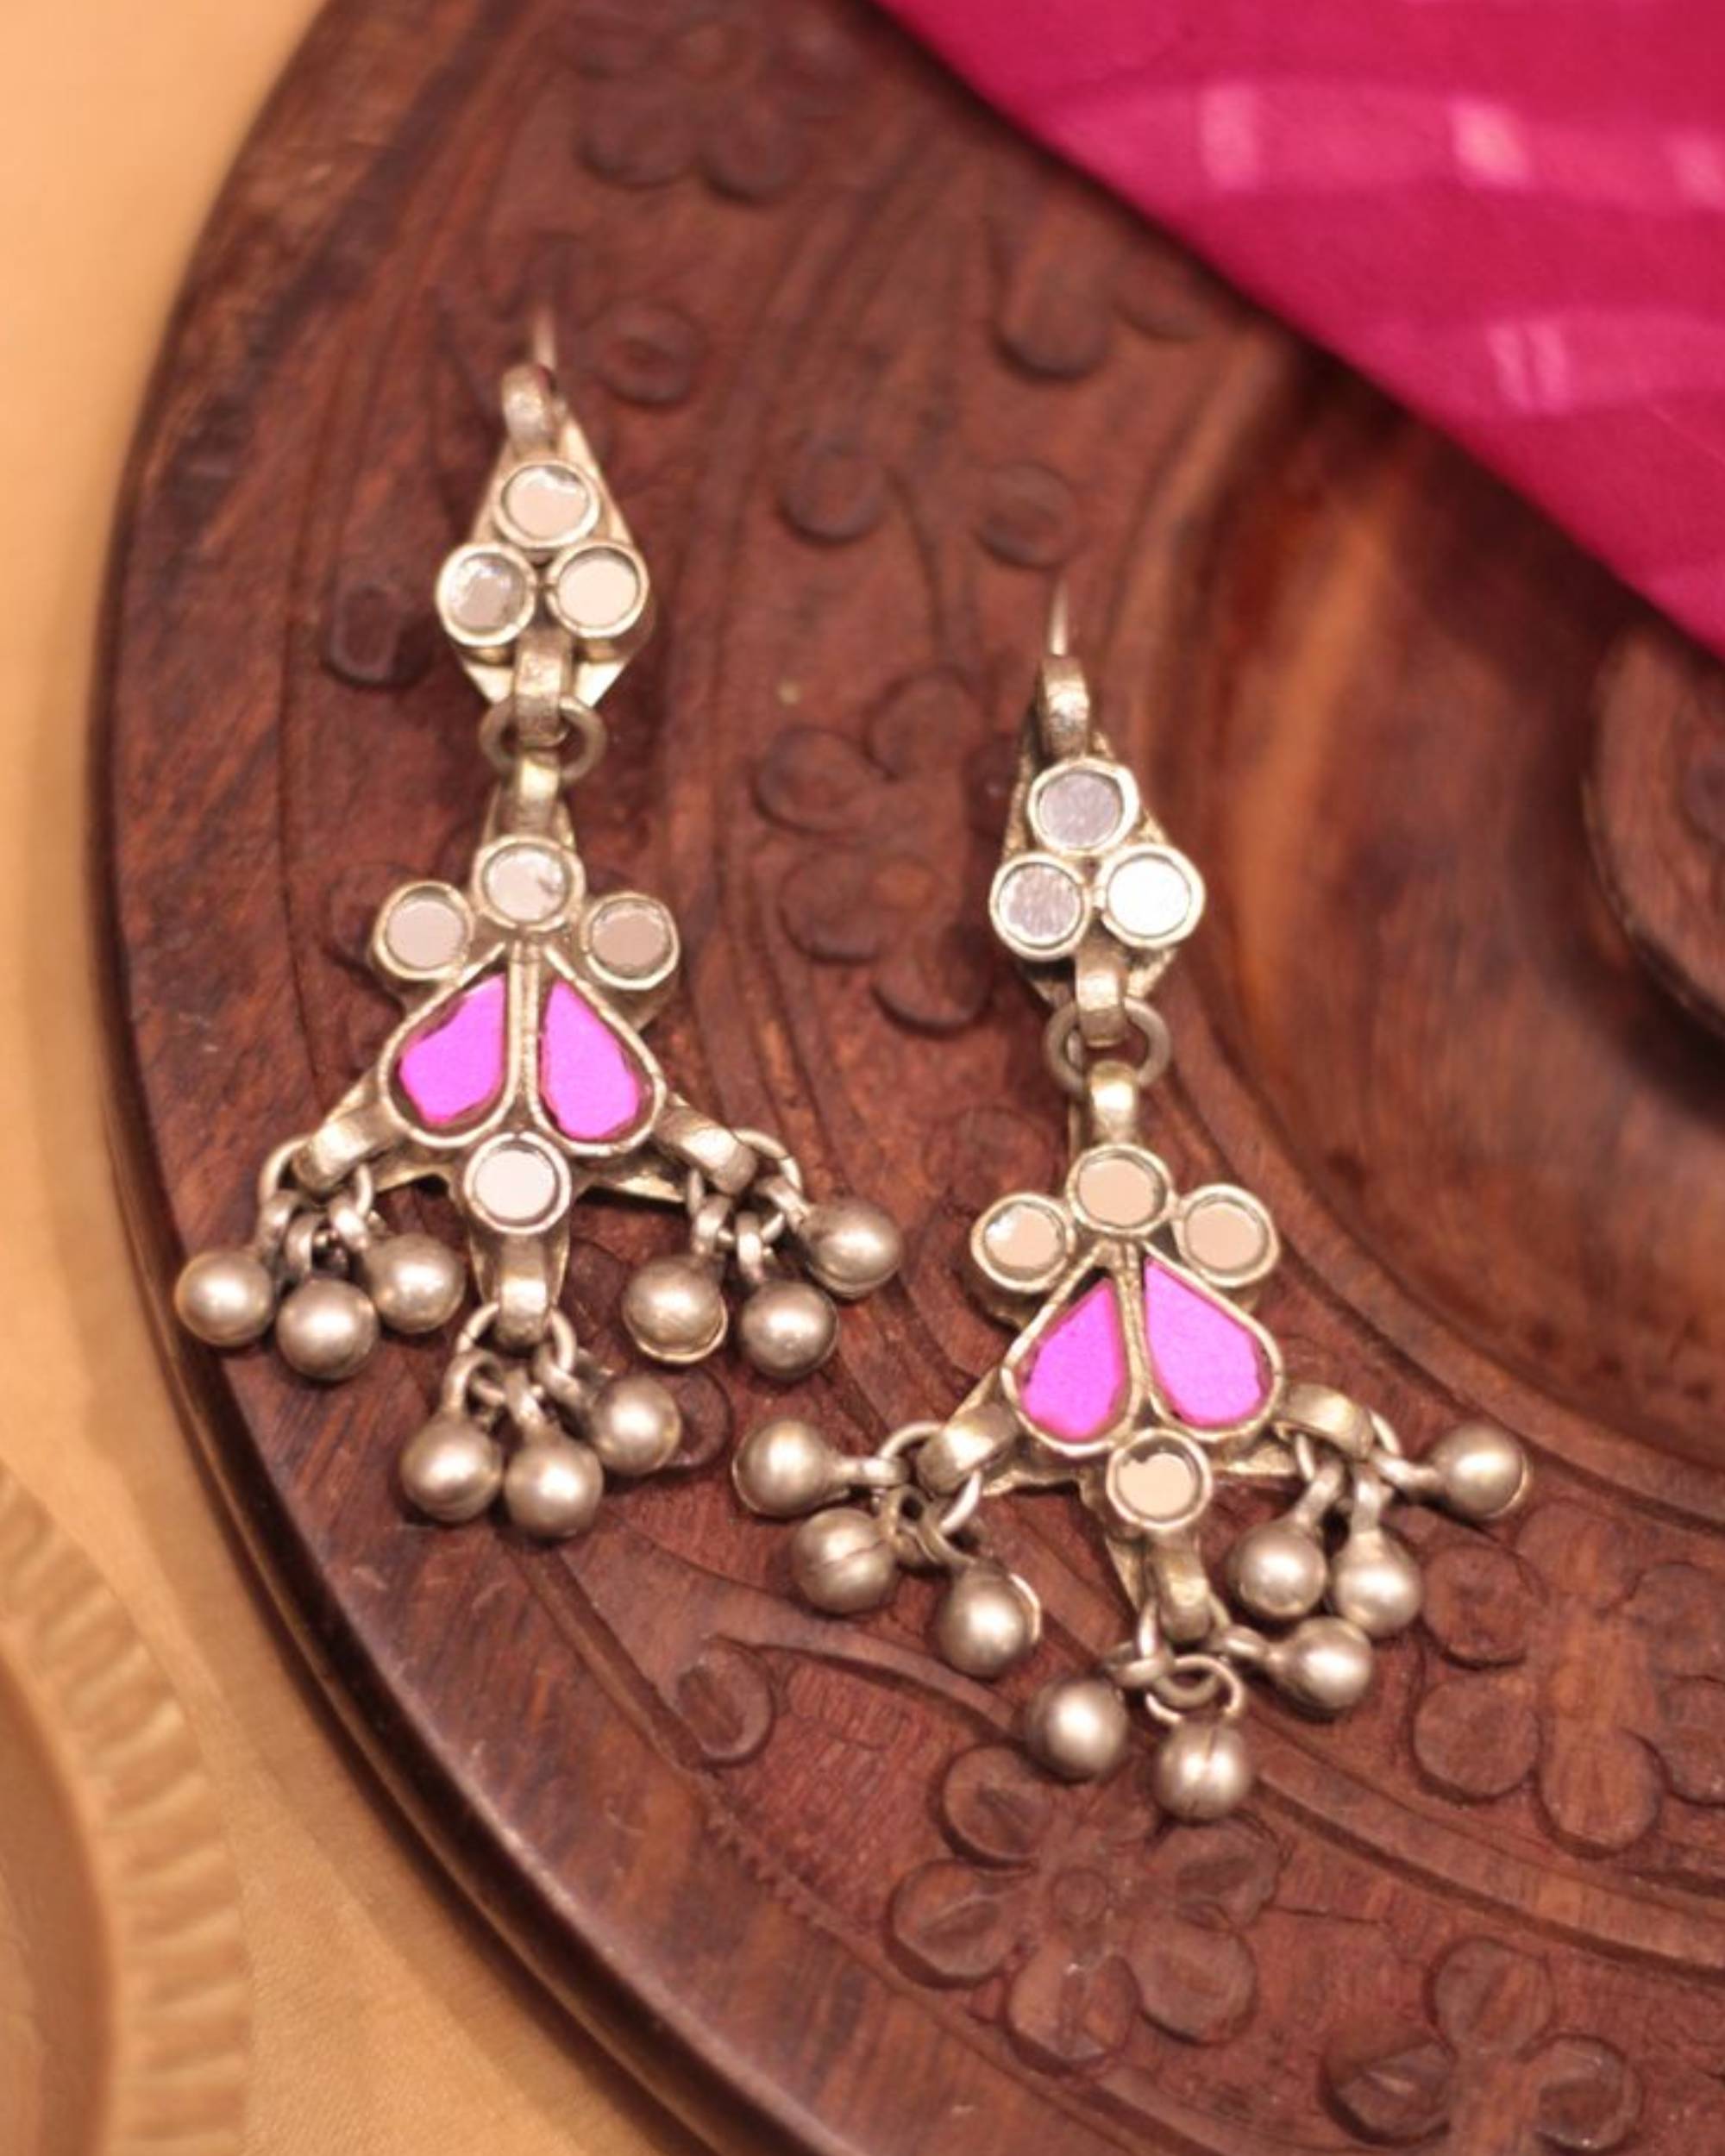 White and pink floral glass work earrings